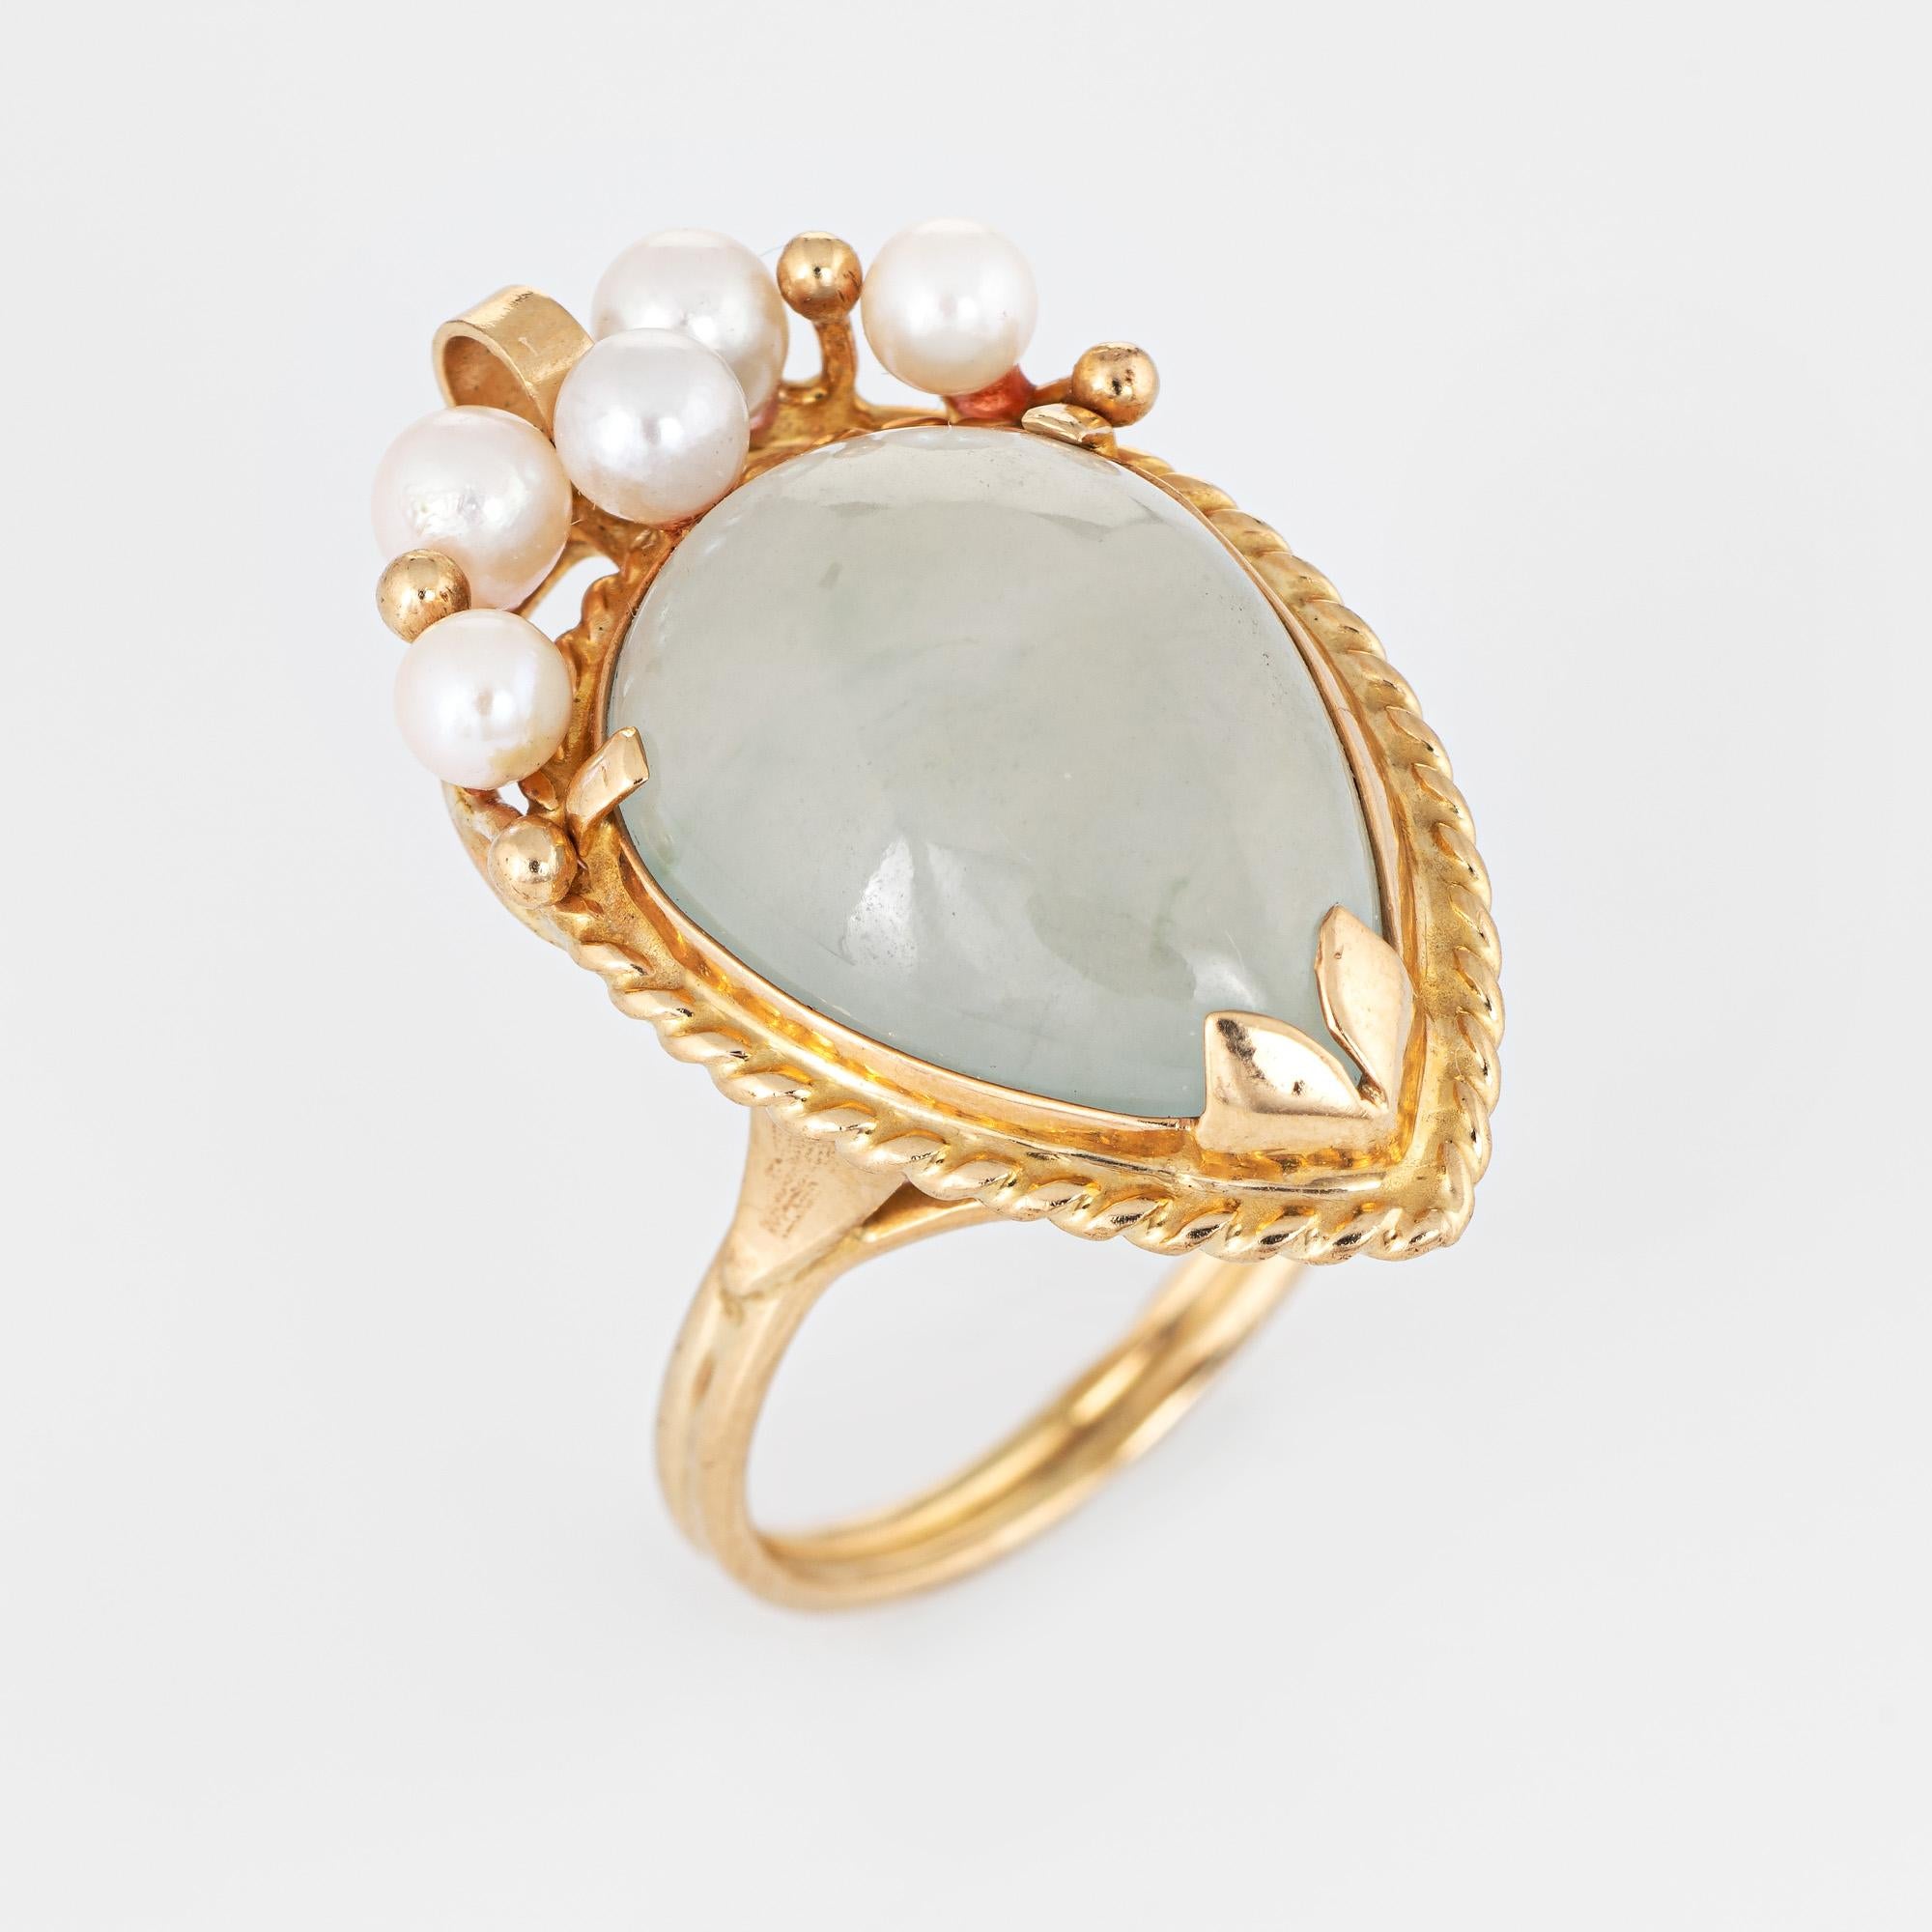 Stylish vintage Ming's jade & cultured pearl cocktail ring crafted in 14 karat yellow gold. 

Cabochon cut jade measures 16.5mm x 12.5mm (estimated at 15 carats) accented with five 3mm to 4mm cultured pearls. The jade is in excellent condition and